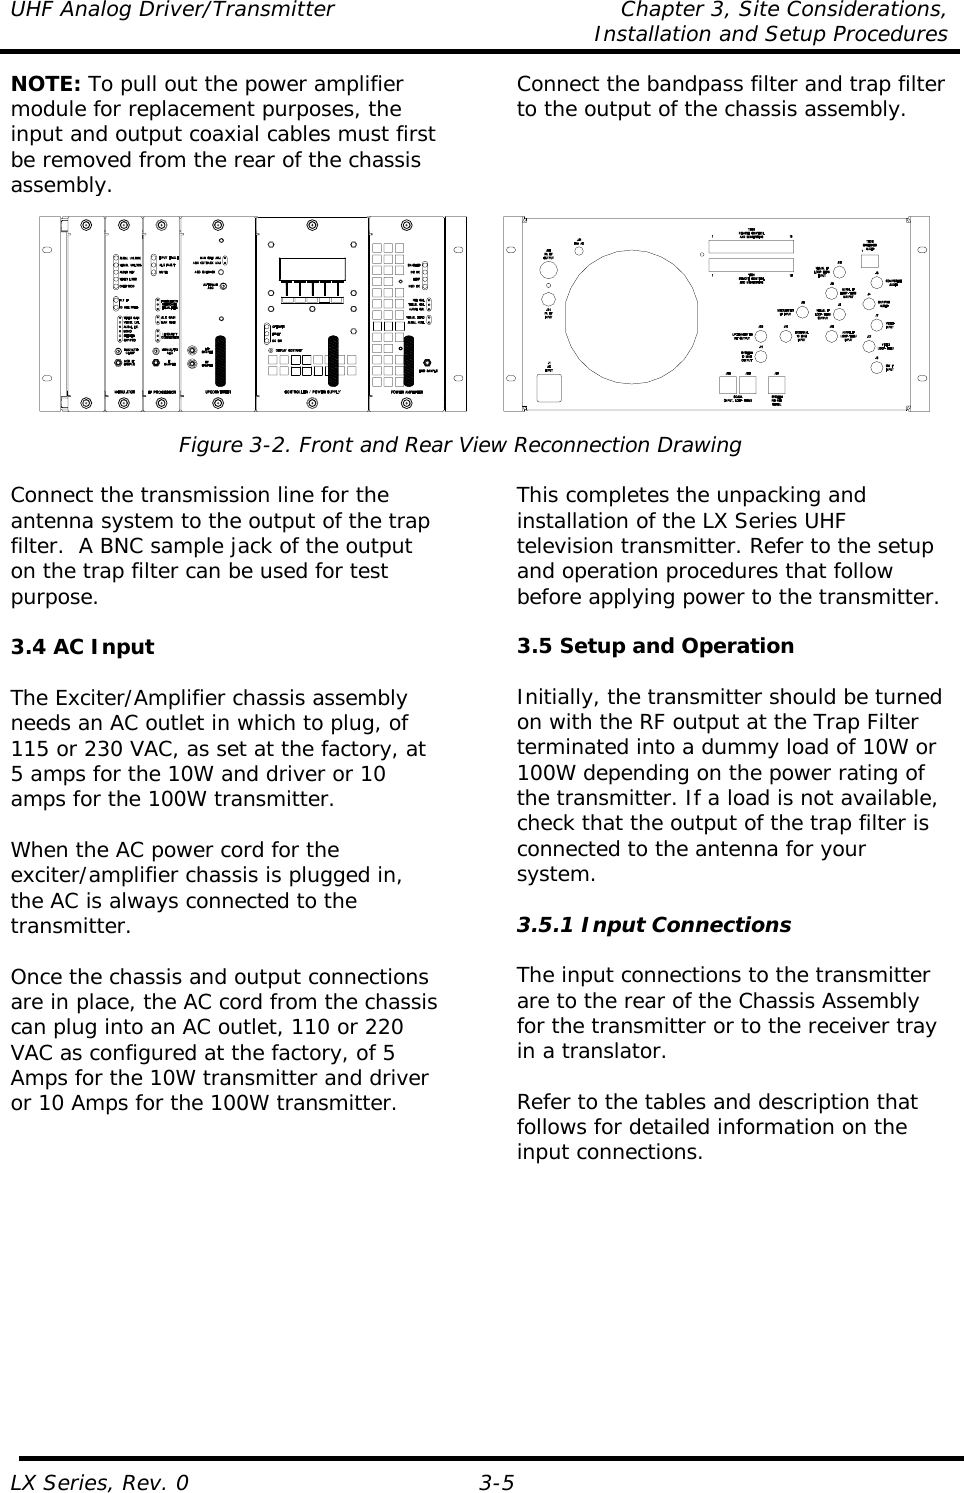 UHF Analog Driver/Transmitter  Chapter 3, Site Considerations,    Installation and Setup Procedures LX Series, Rev. 0 3-5 NOTE: To pull out the power amplifier module for replacement purposes, the input and output coaxial cables must first be removed from the rear of the chassis assembly. Connect the bandpass filter and trap filter to the output of the chassis assembly.   Figure 3-2. Front and Rear View Reconnection Drawing  Connect the transmission line for the antenna system to the output of the trap filter.  A BNC sample jack of the output on the trap filter can be used for test purpose.  3.4 AC Input  The Exciter/Amplifier chassis assembly needs an AC outlet in which to plug, of 115 or 230 VAC, as set at the factory, at 5 amps for the 10W and driver or 10 amps for the 100W transmitter.  When the AC power cord for the exciter/amplifier chassis is plugged in, the AC is always connected to the transmitter.   Once the chassis and output connections are in place, the AC cord from the chassis can plug into an AC outlet, 110 or 220 VAC as configured at the factory, of 5 Amps for the 10W transmitter and driver or 10 Amps for the 100W transmitter.  This completes the unpacking and installation of the LX Series UHF television transmitter. Refer to the setup and operation procedures that follow before applying power to the transmitter.  3.5 Setup and Operation  Initially, the transmitter should be turned on with the RF output at the Trap Filter terminated into a dummy load of 10W or 100W depending on the power rating of the transmitter. If a load is not available, check that the output of the trap filter is connected to the antenna for your system.  3.5.1 Input Connections  The input connections to the transmitter are to the rear of the Chassis Assembly for the transmitter or to the receiver tray in a translator.  Refer to the tables and description that follows for detailed information on the input connections.  